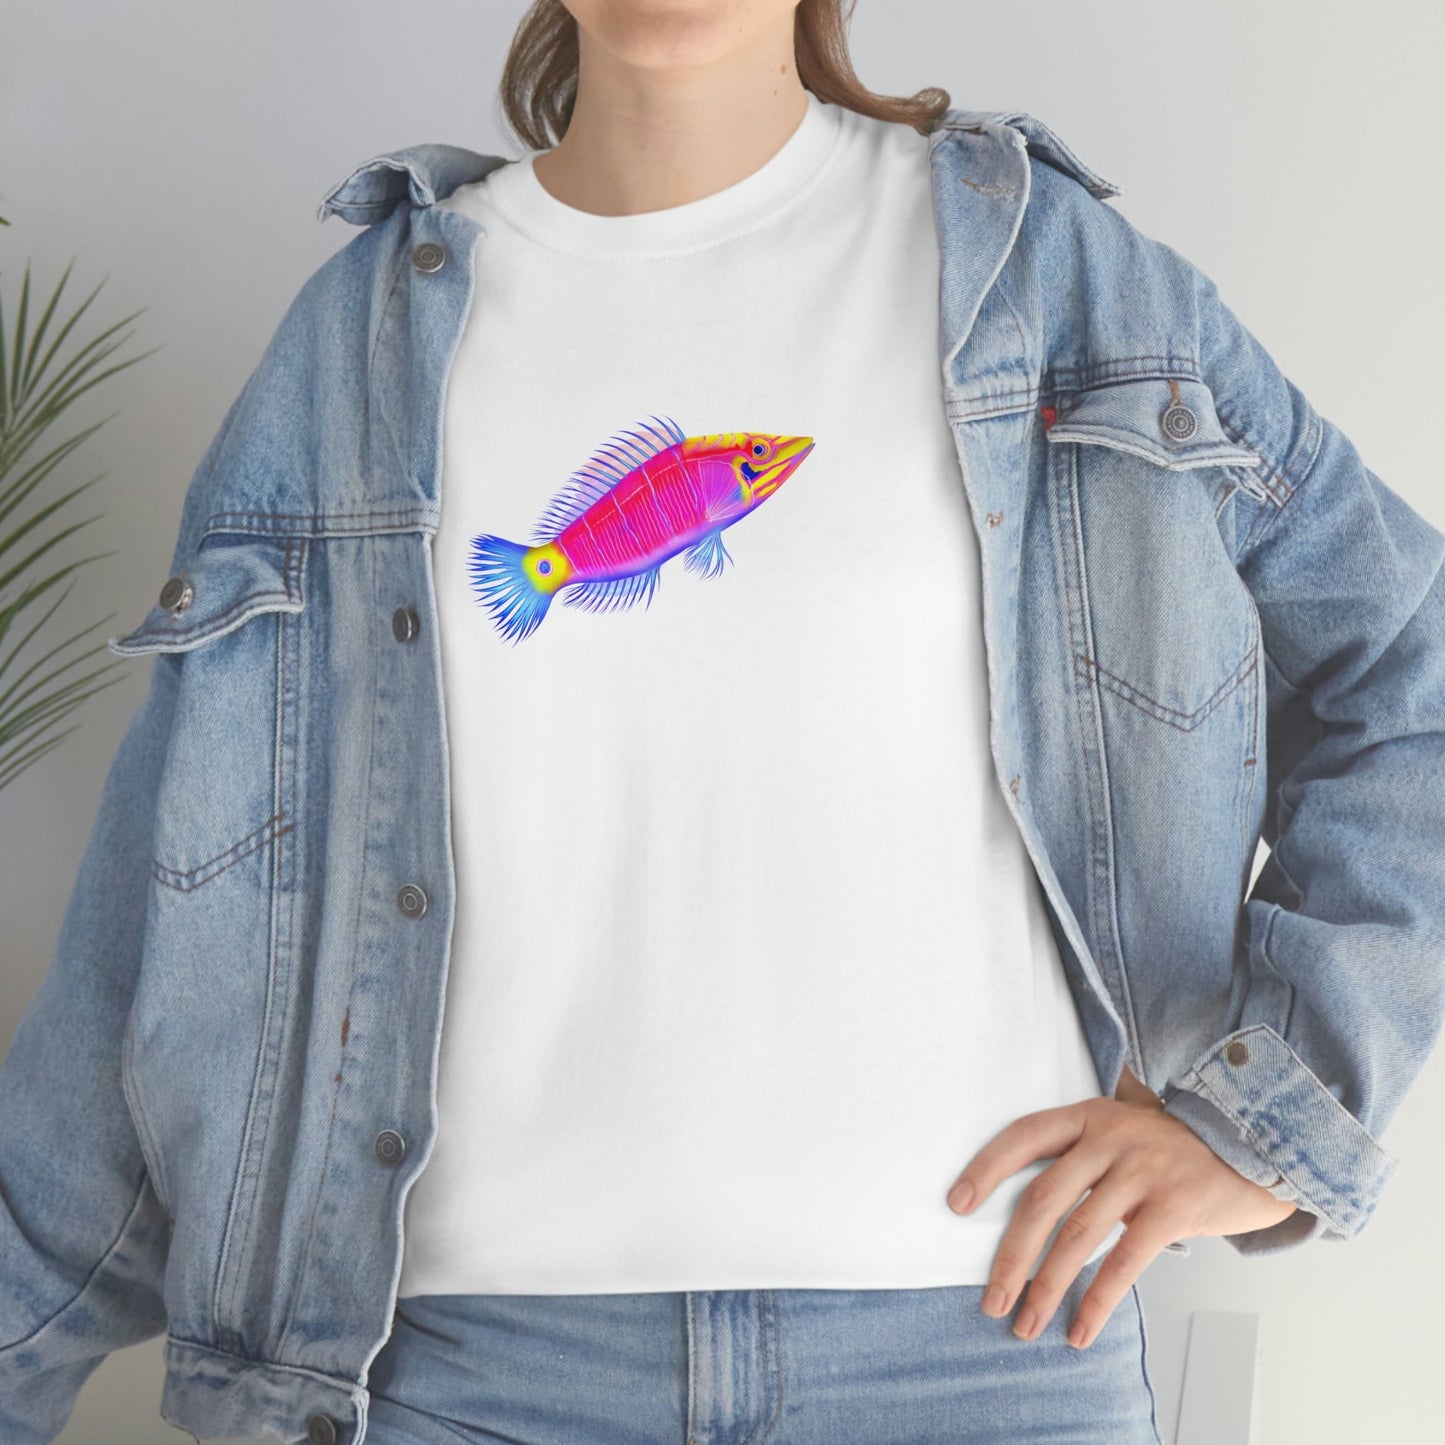 Simple Mystery Wrasse Shirt - Reef of Clowns